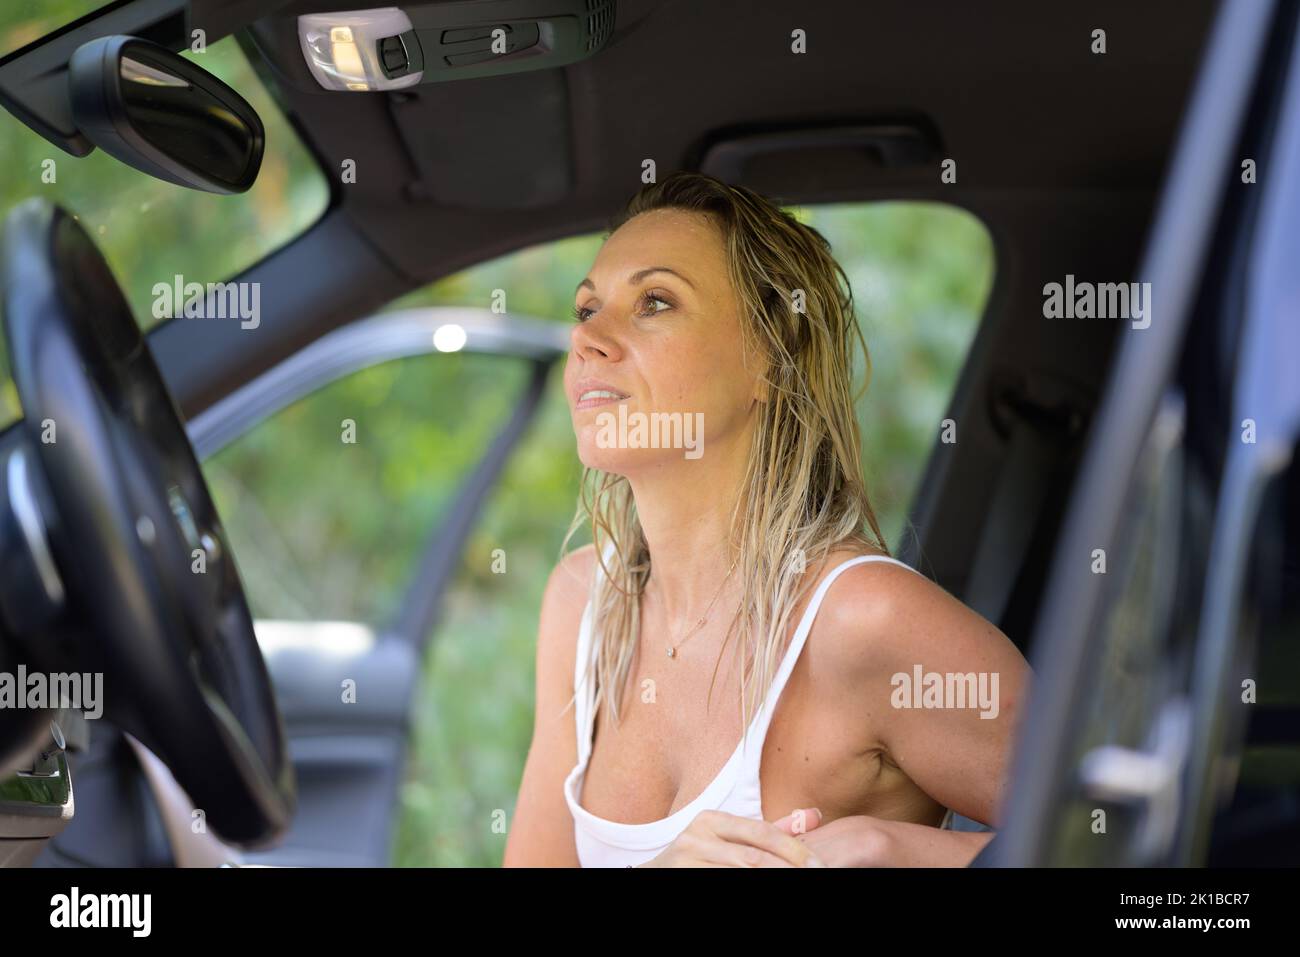 Woman with wet hair sitting in a car waiting with greenery in the background Stock Photo